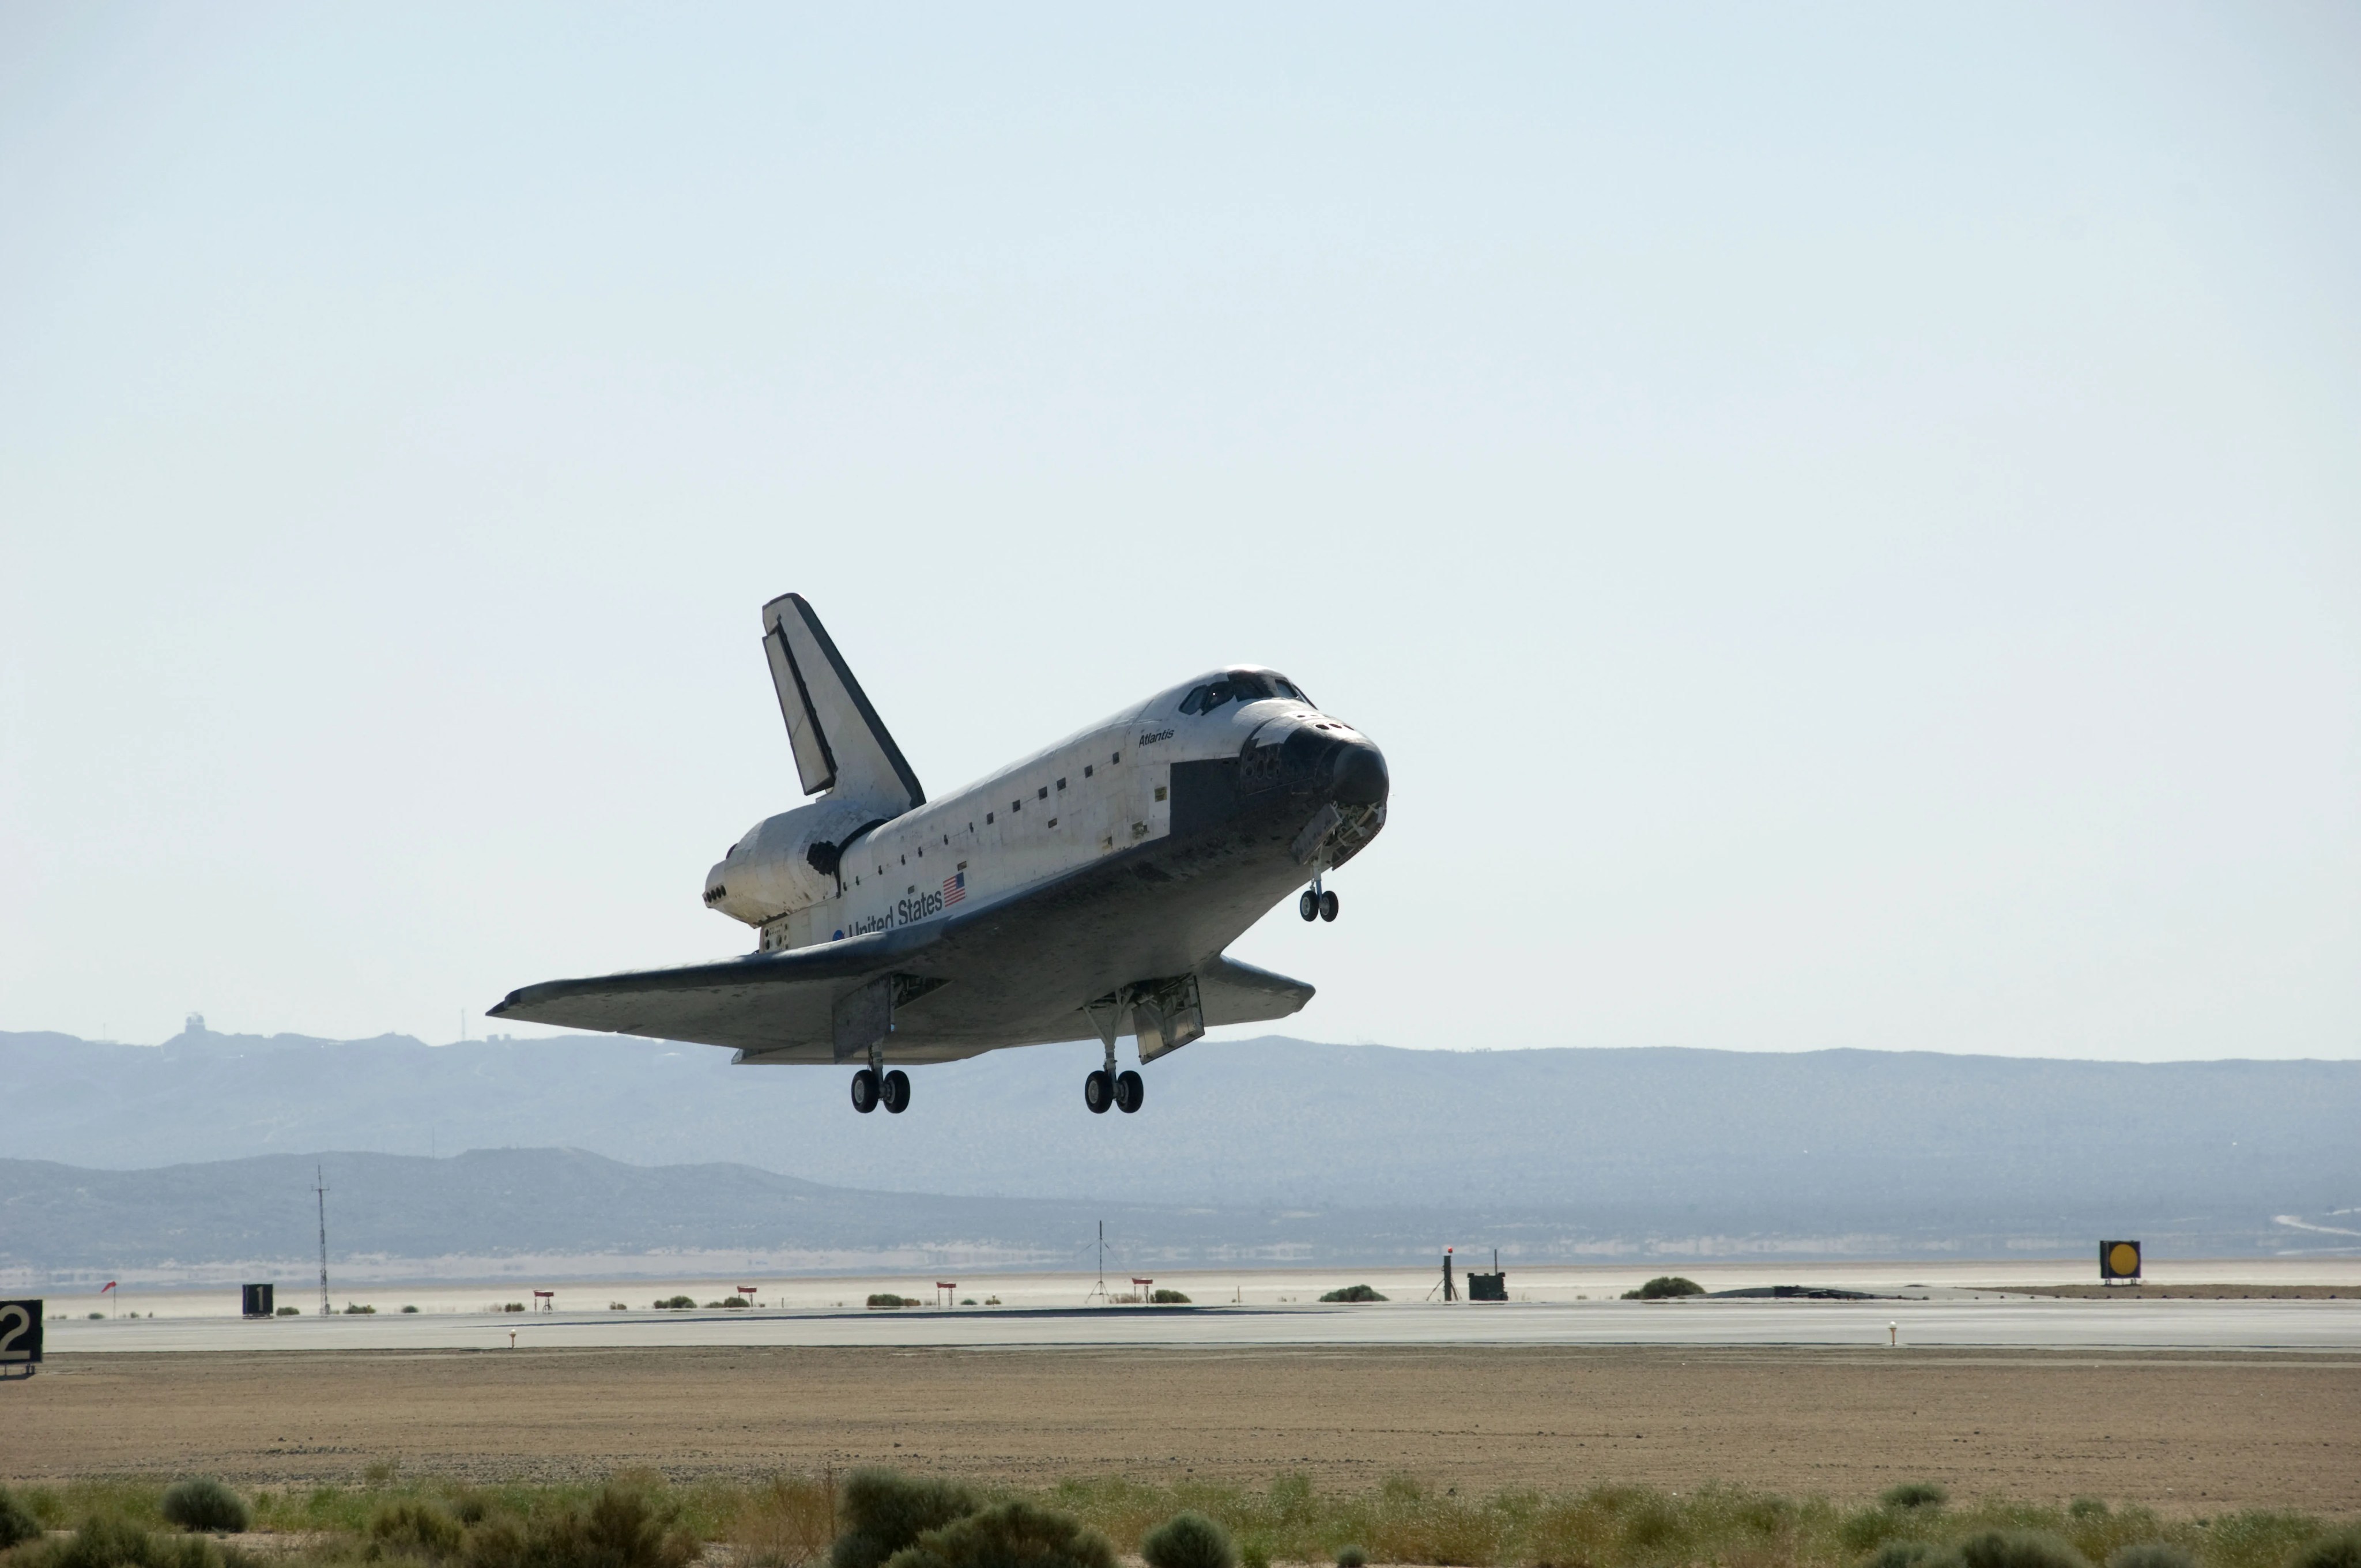 The space shuttle floats a few feet above the runway as it is about to land.